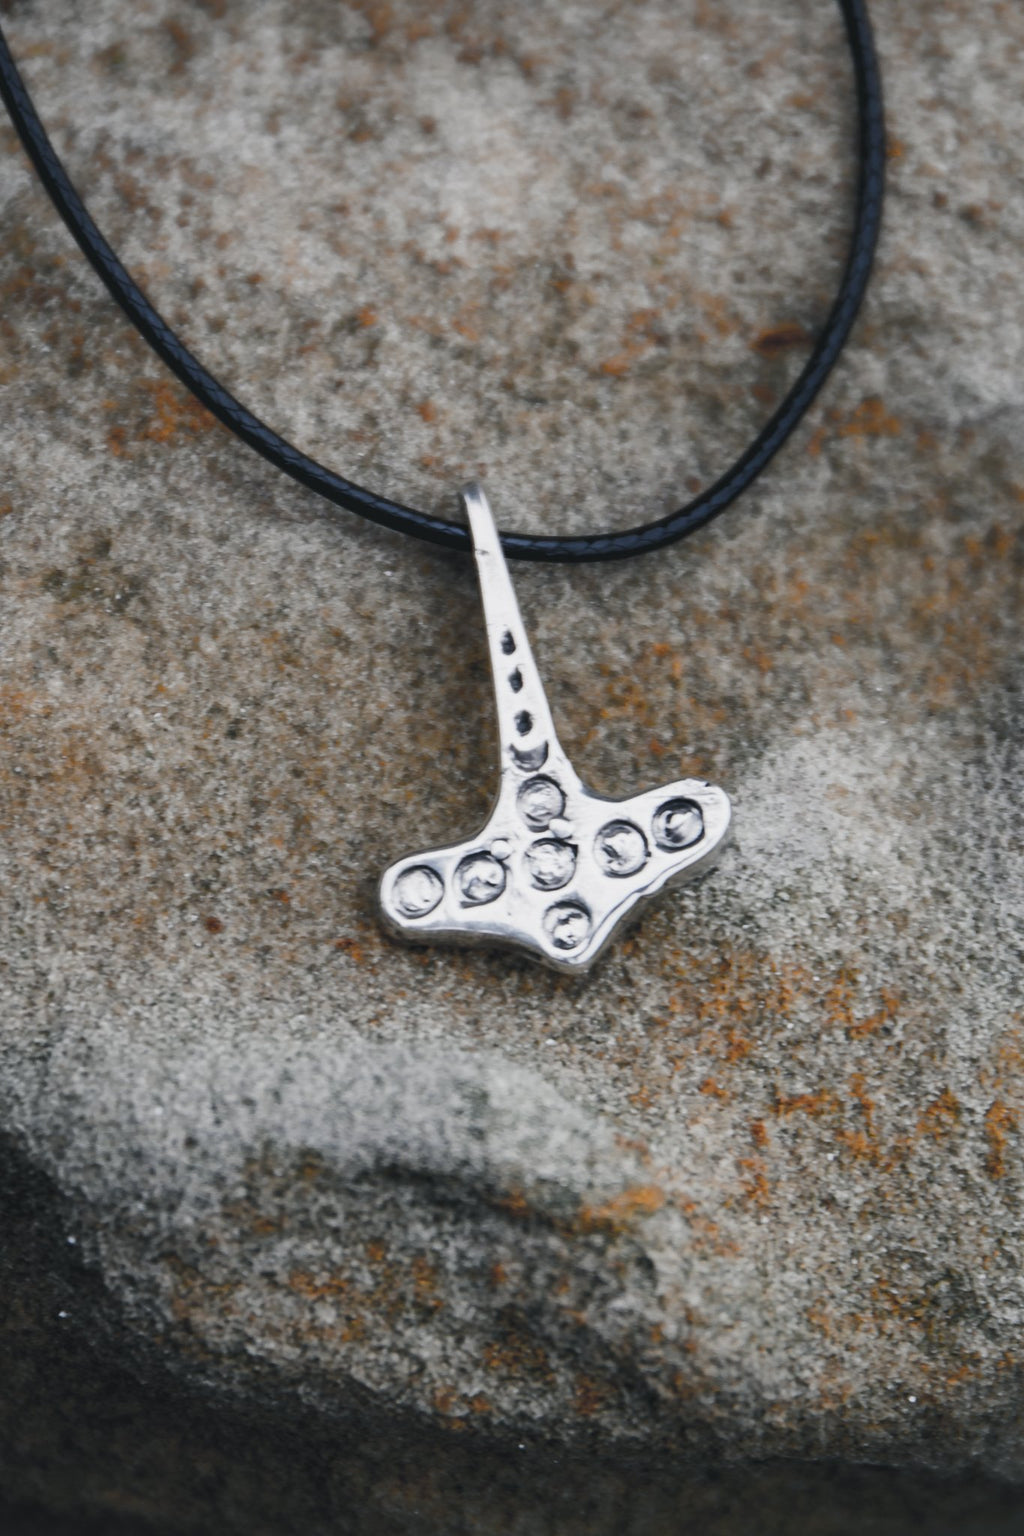 Flakstad mjolnir, Descended from Odin, Organic T-shirts, Staithes Hoodie, Merino Wool Hoodie, Odin, TYR, Thor, Ragnar, Bjorn Ironside, Vikings, Anglo Saxon, Norse, Fitness Gear, Horns, Jewellery, Silver